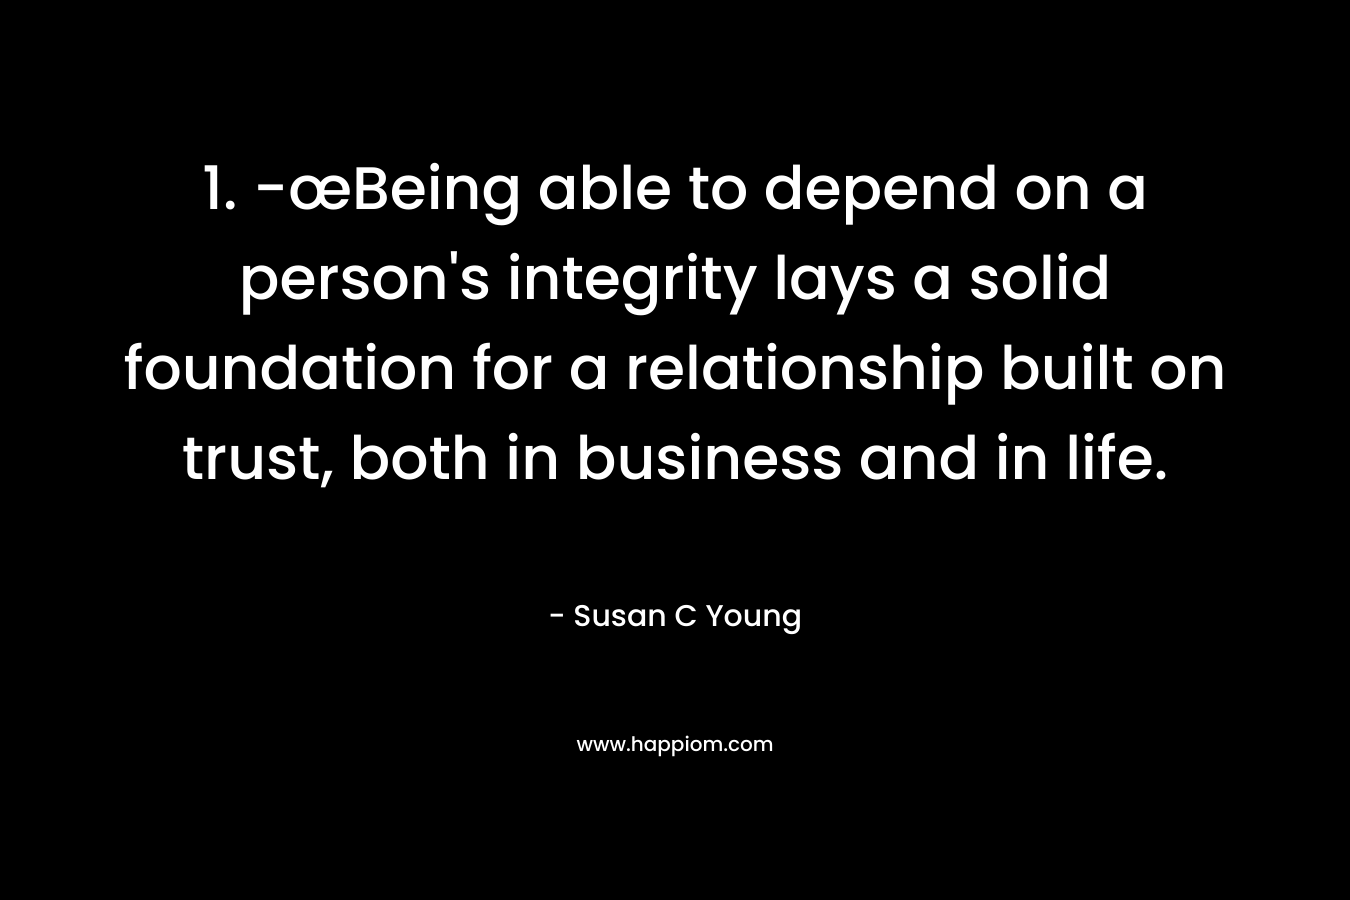 1.	-œBeing able to depend on a person's integrity lays a solid foundation for a relationship built on trust, both in business and in life.